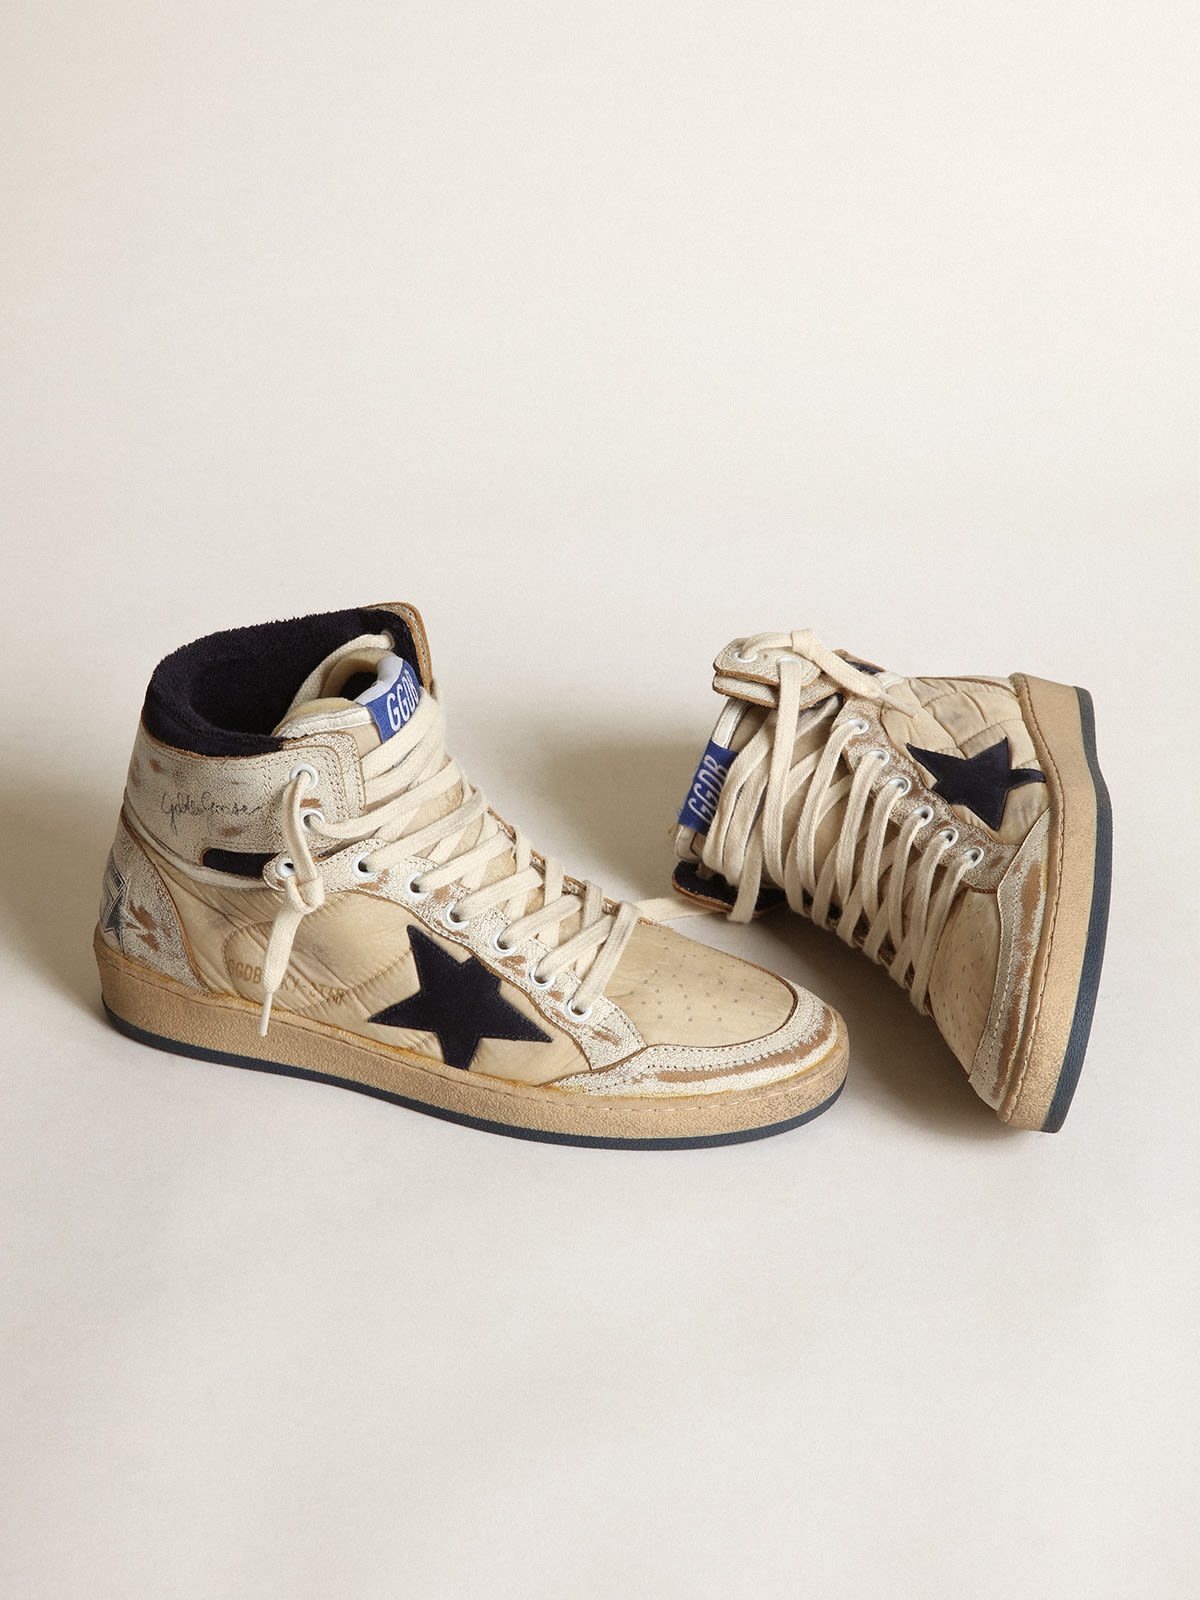 Women’s Sky-Star in nylon and white leather with blue suede star - 2